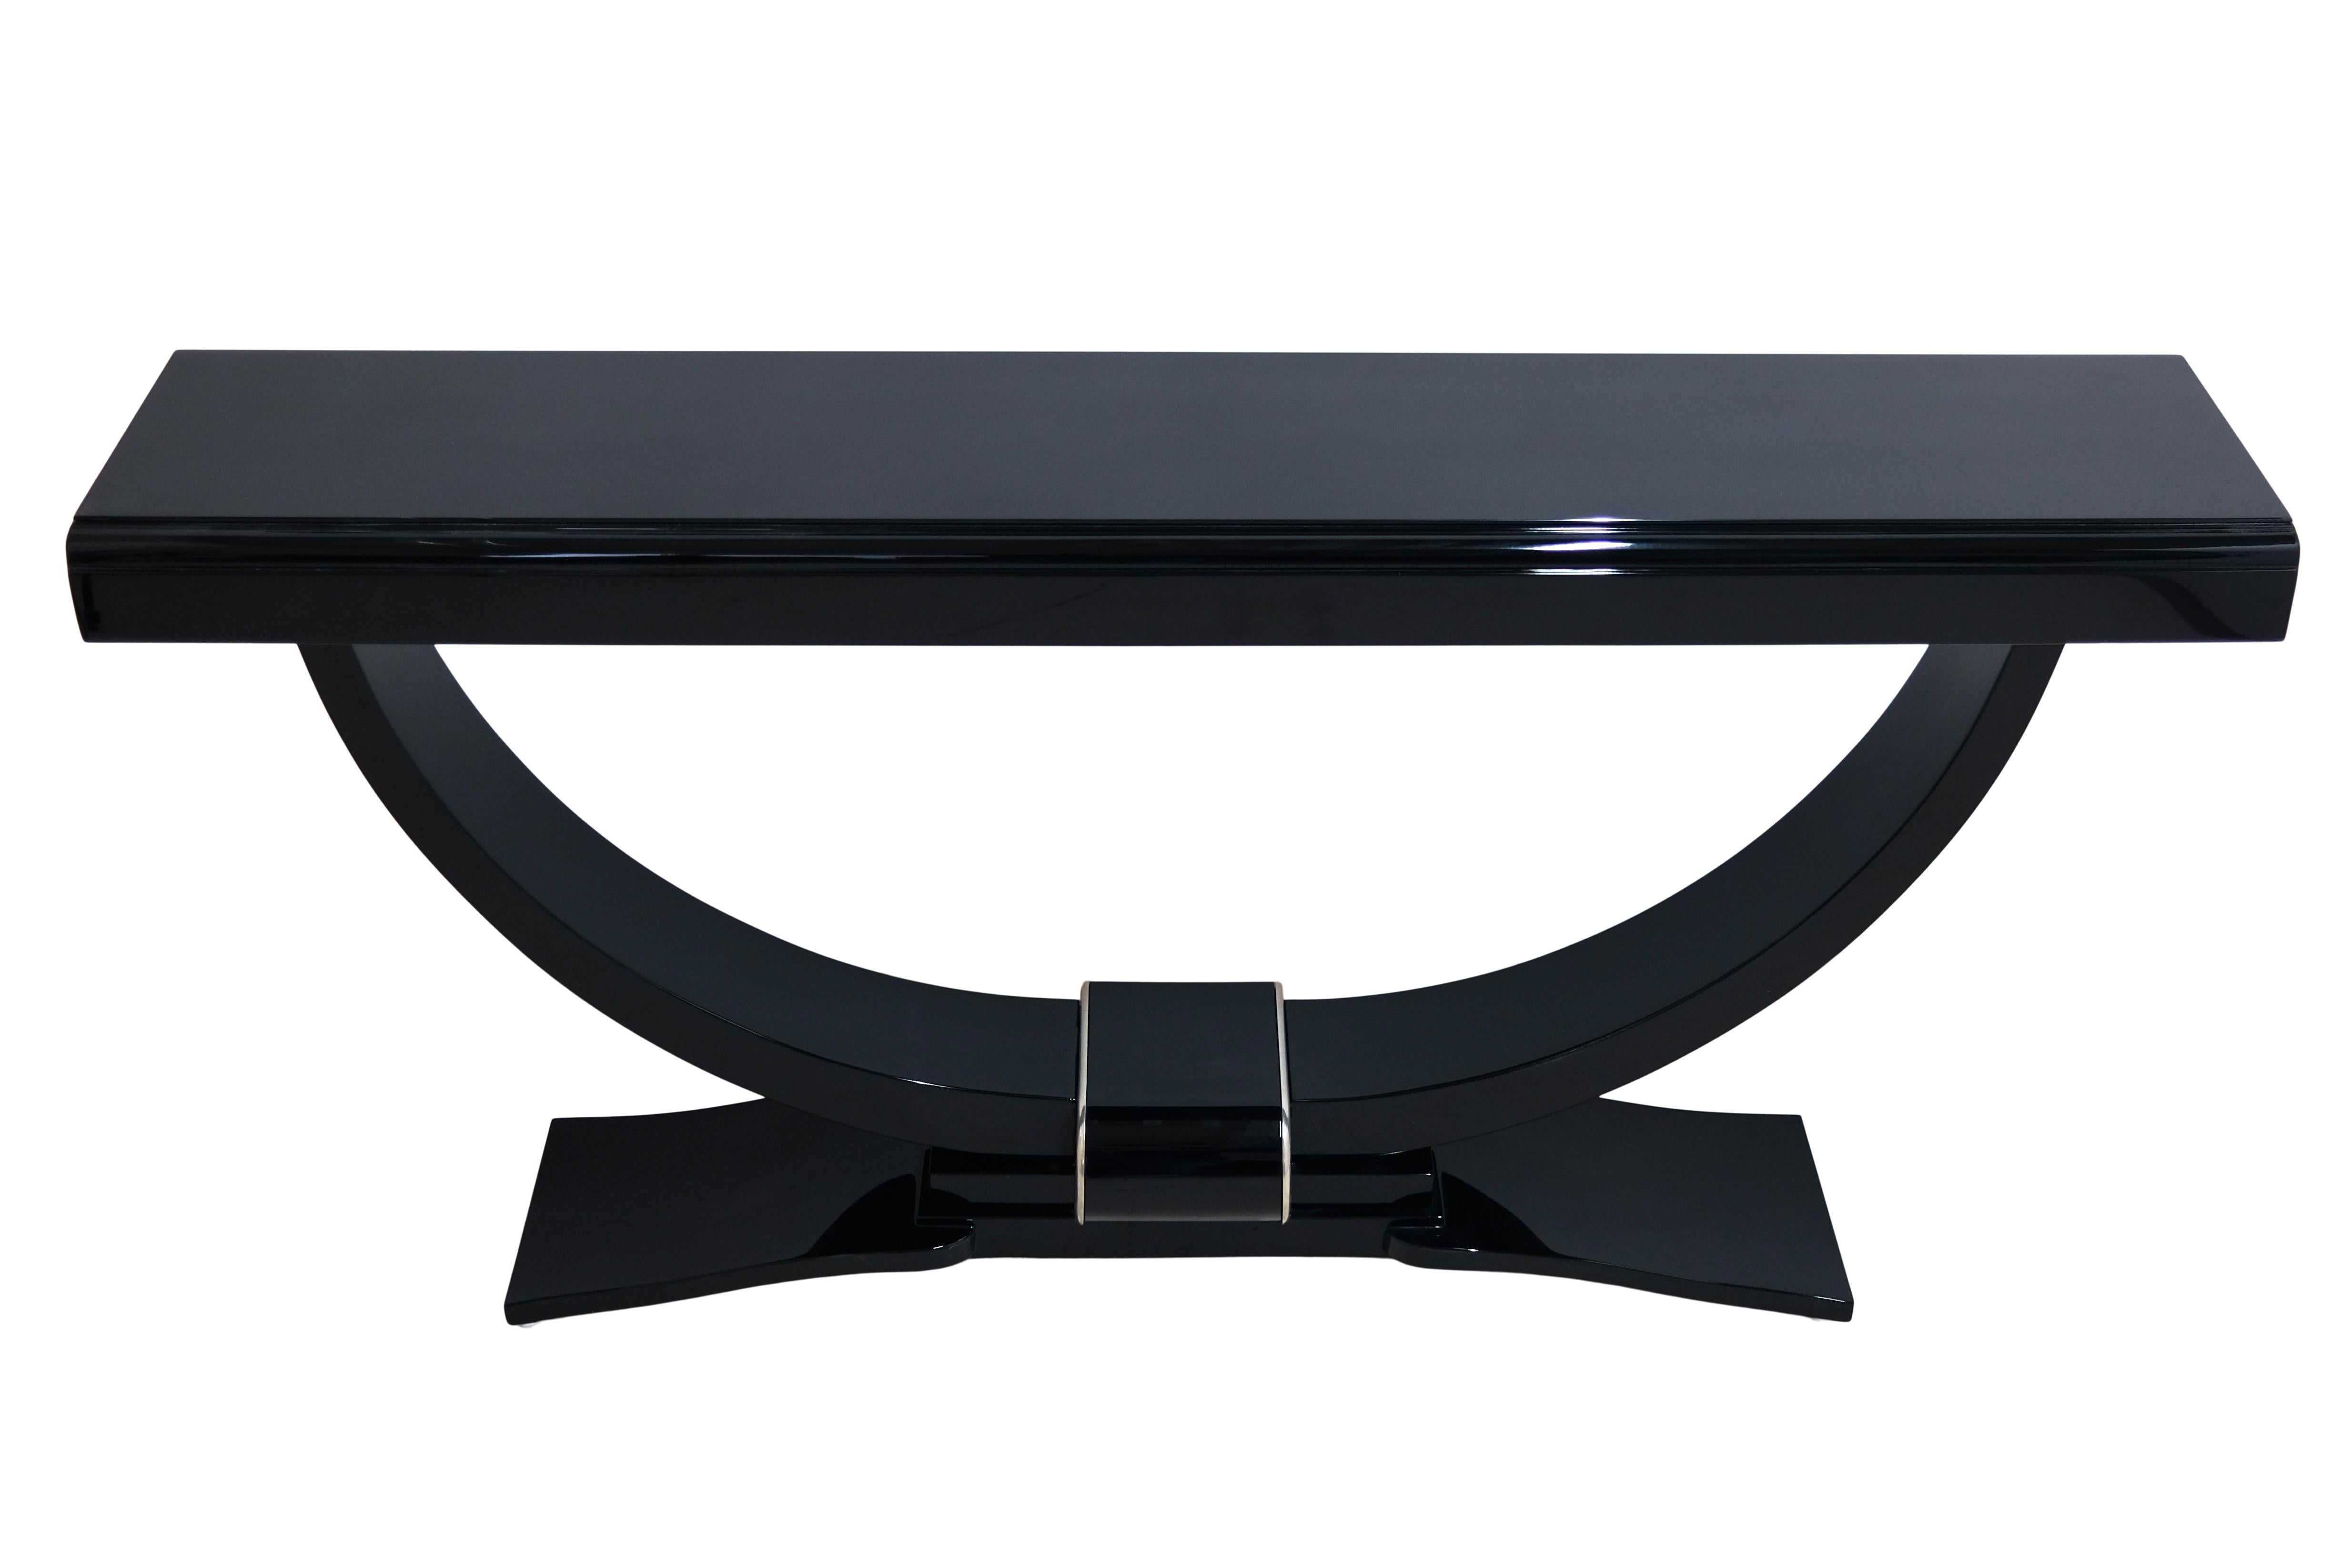 Console table
Piano lacquer in black high gloss
Original metal applications, chrome/nickel plated
Can be protected with a glass top black in itself for daily use.

Original Art Deco, France 1930s

Dimensions:
Width: 160 cm
Height: 79